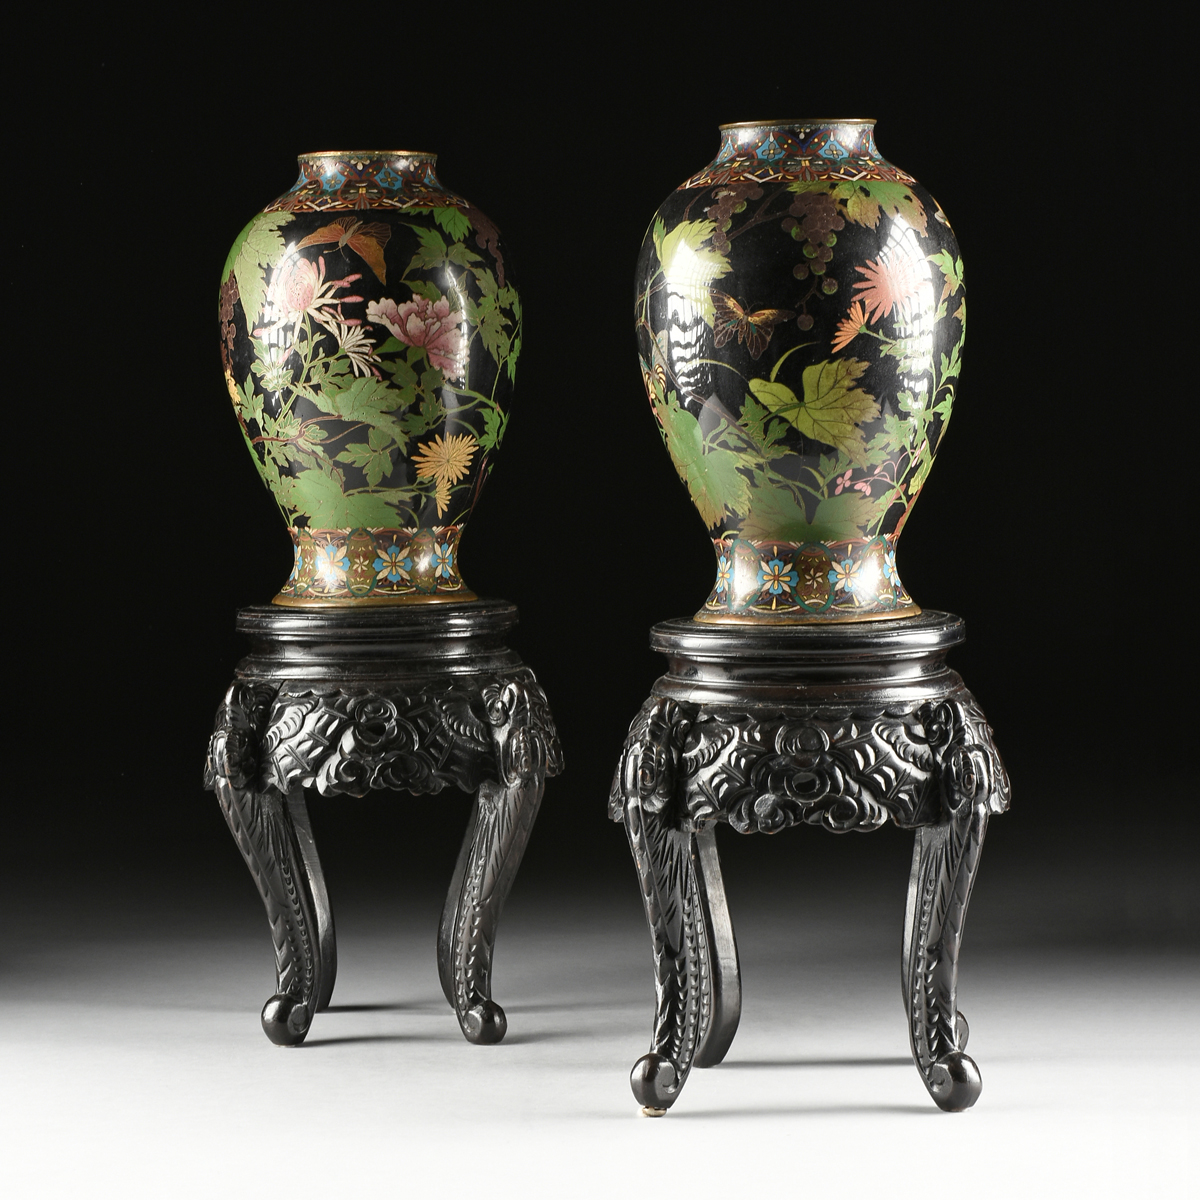 A PAIR OF ANTIQUE JAPANESE BLACK GROUND CLOISONNÃ‰ VASES WITH STANDS, TAISHO PERIOD (1912-1926),